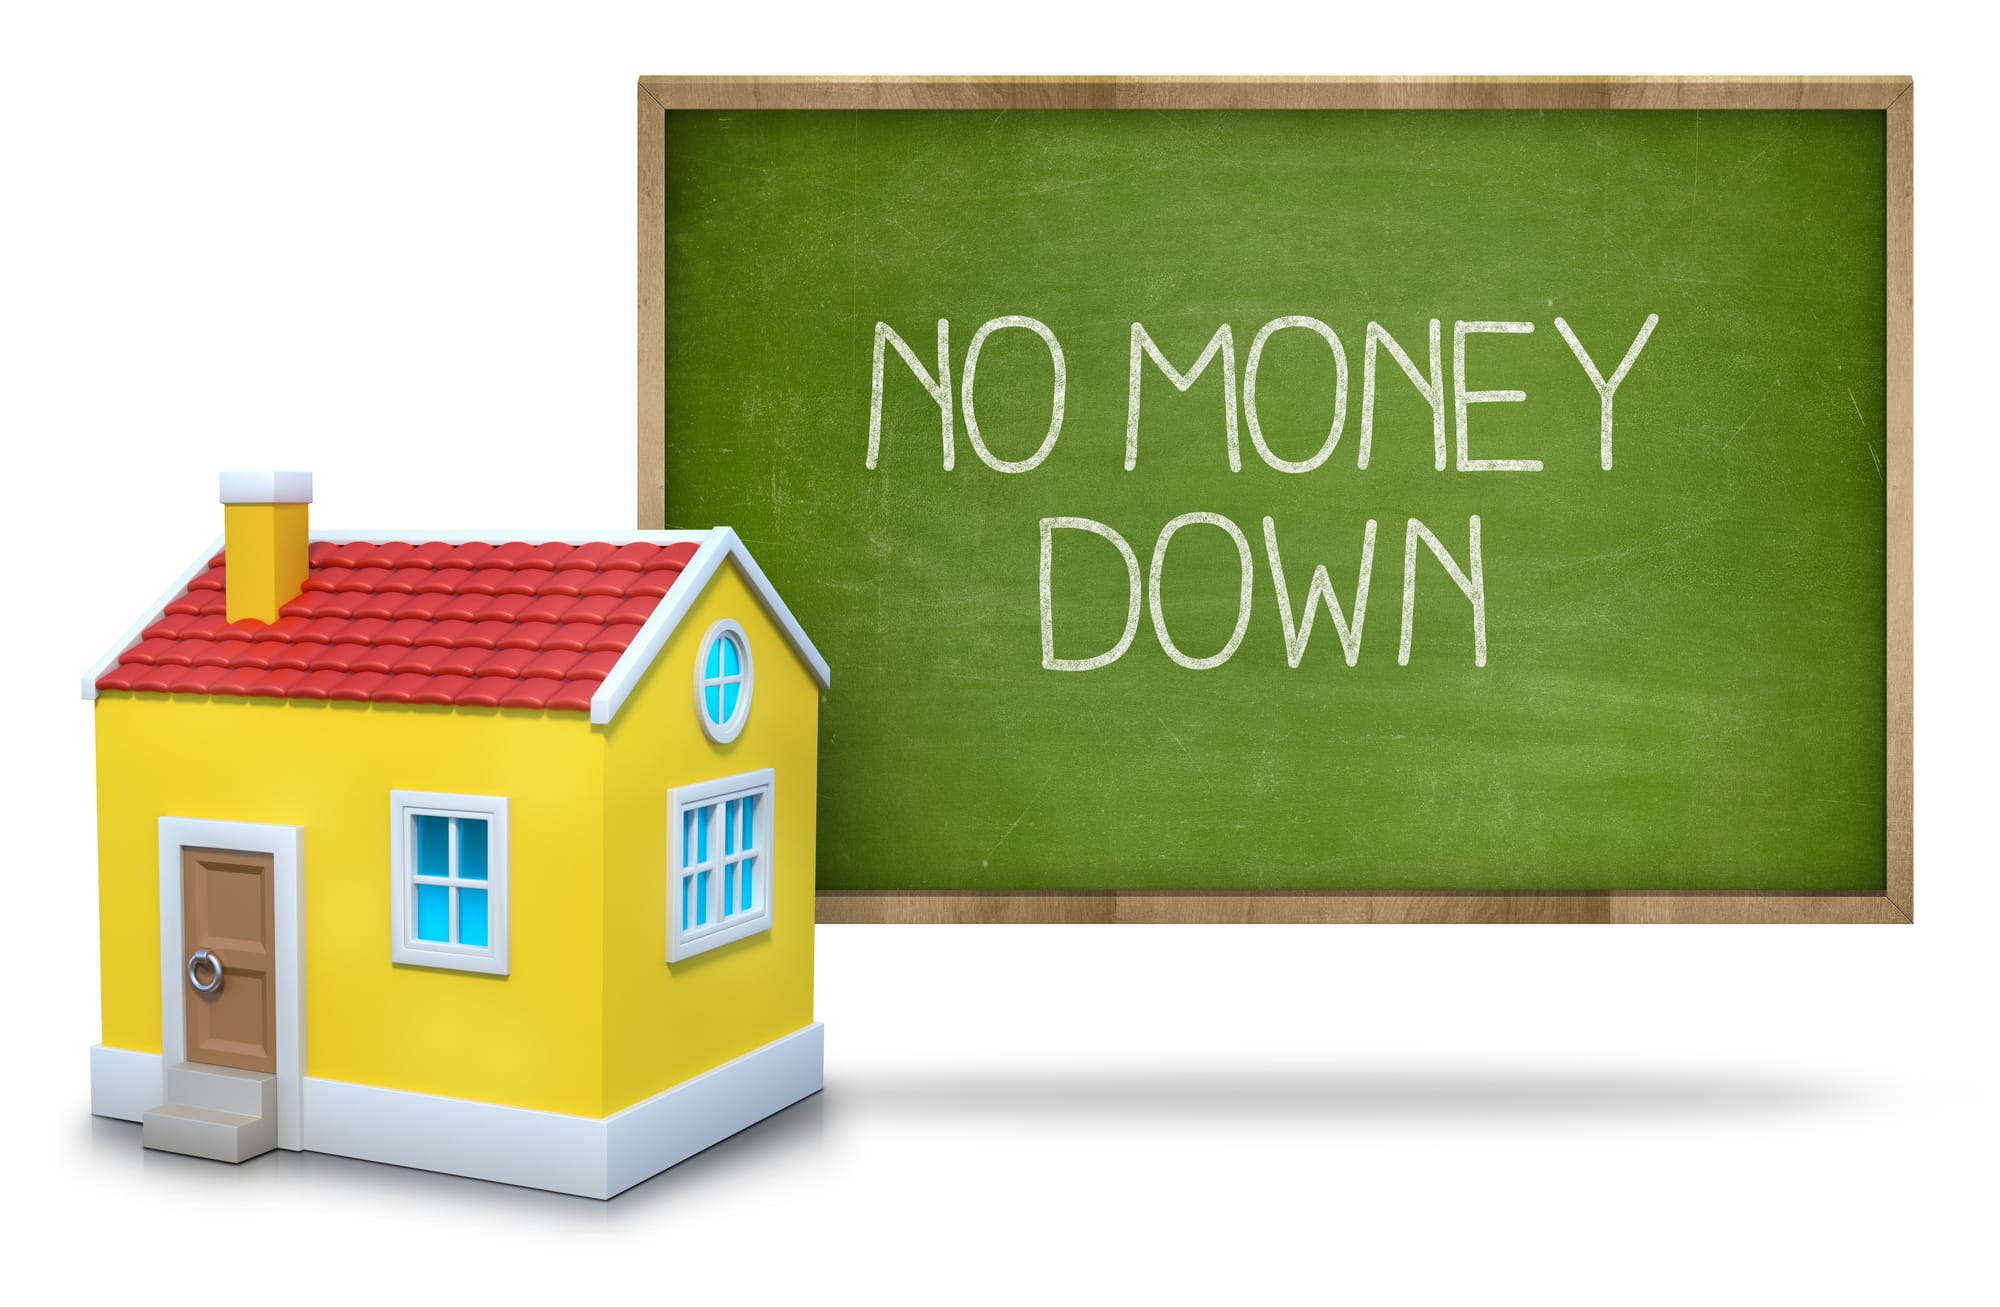 can you invest in real estate with no money down?